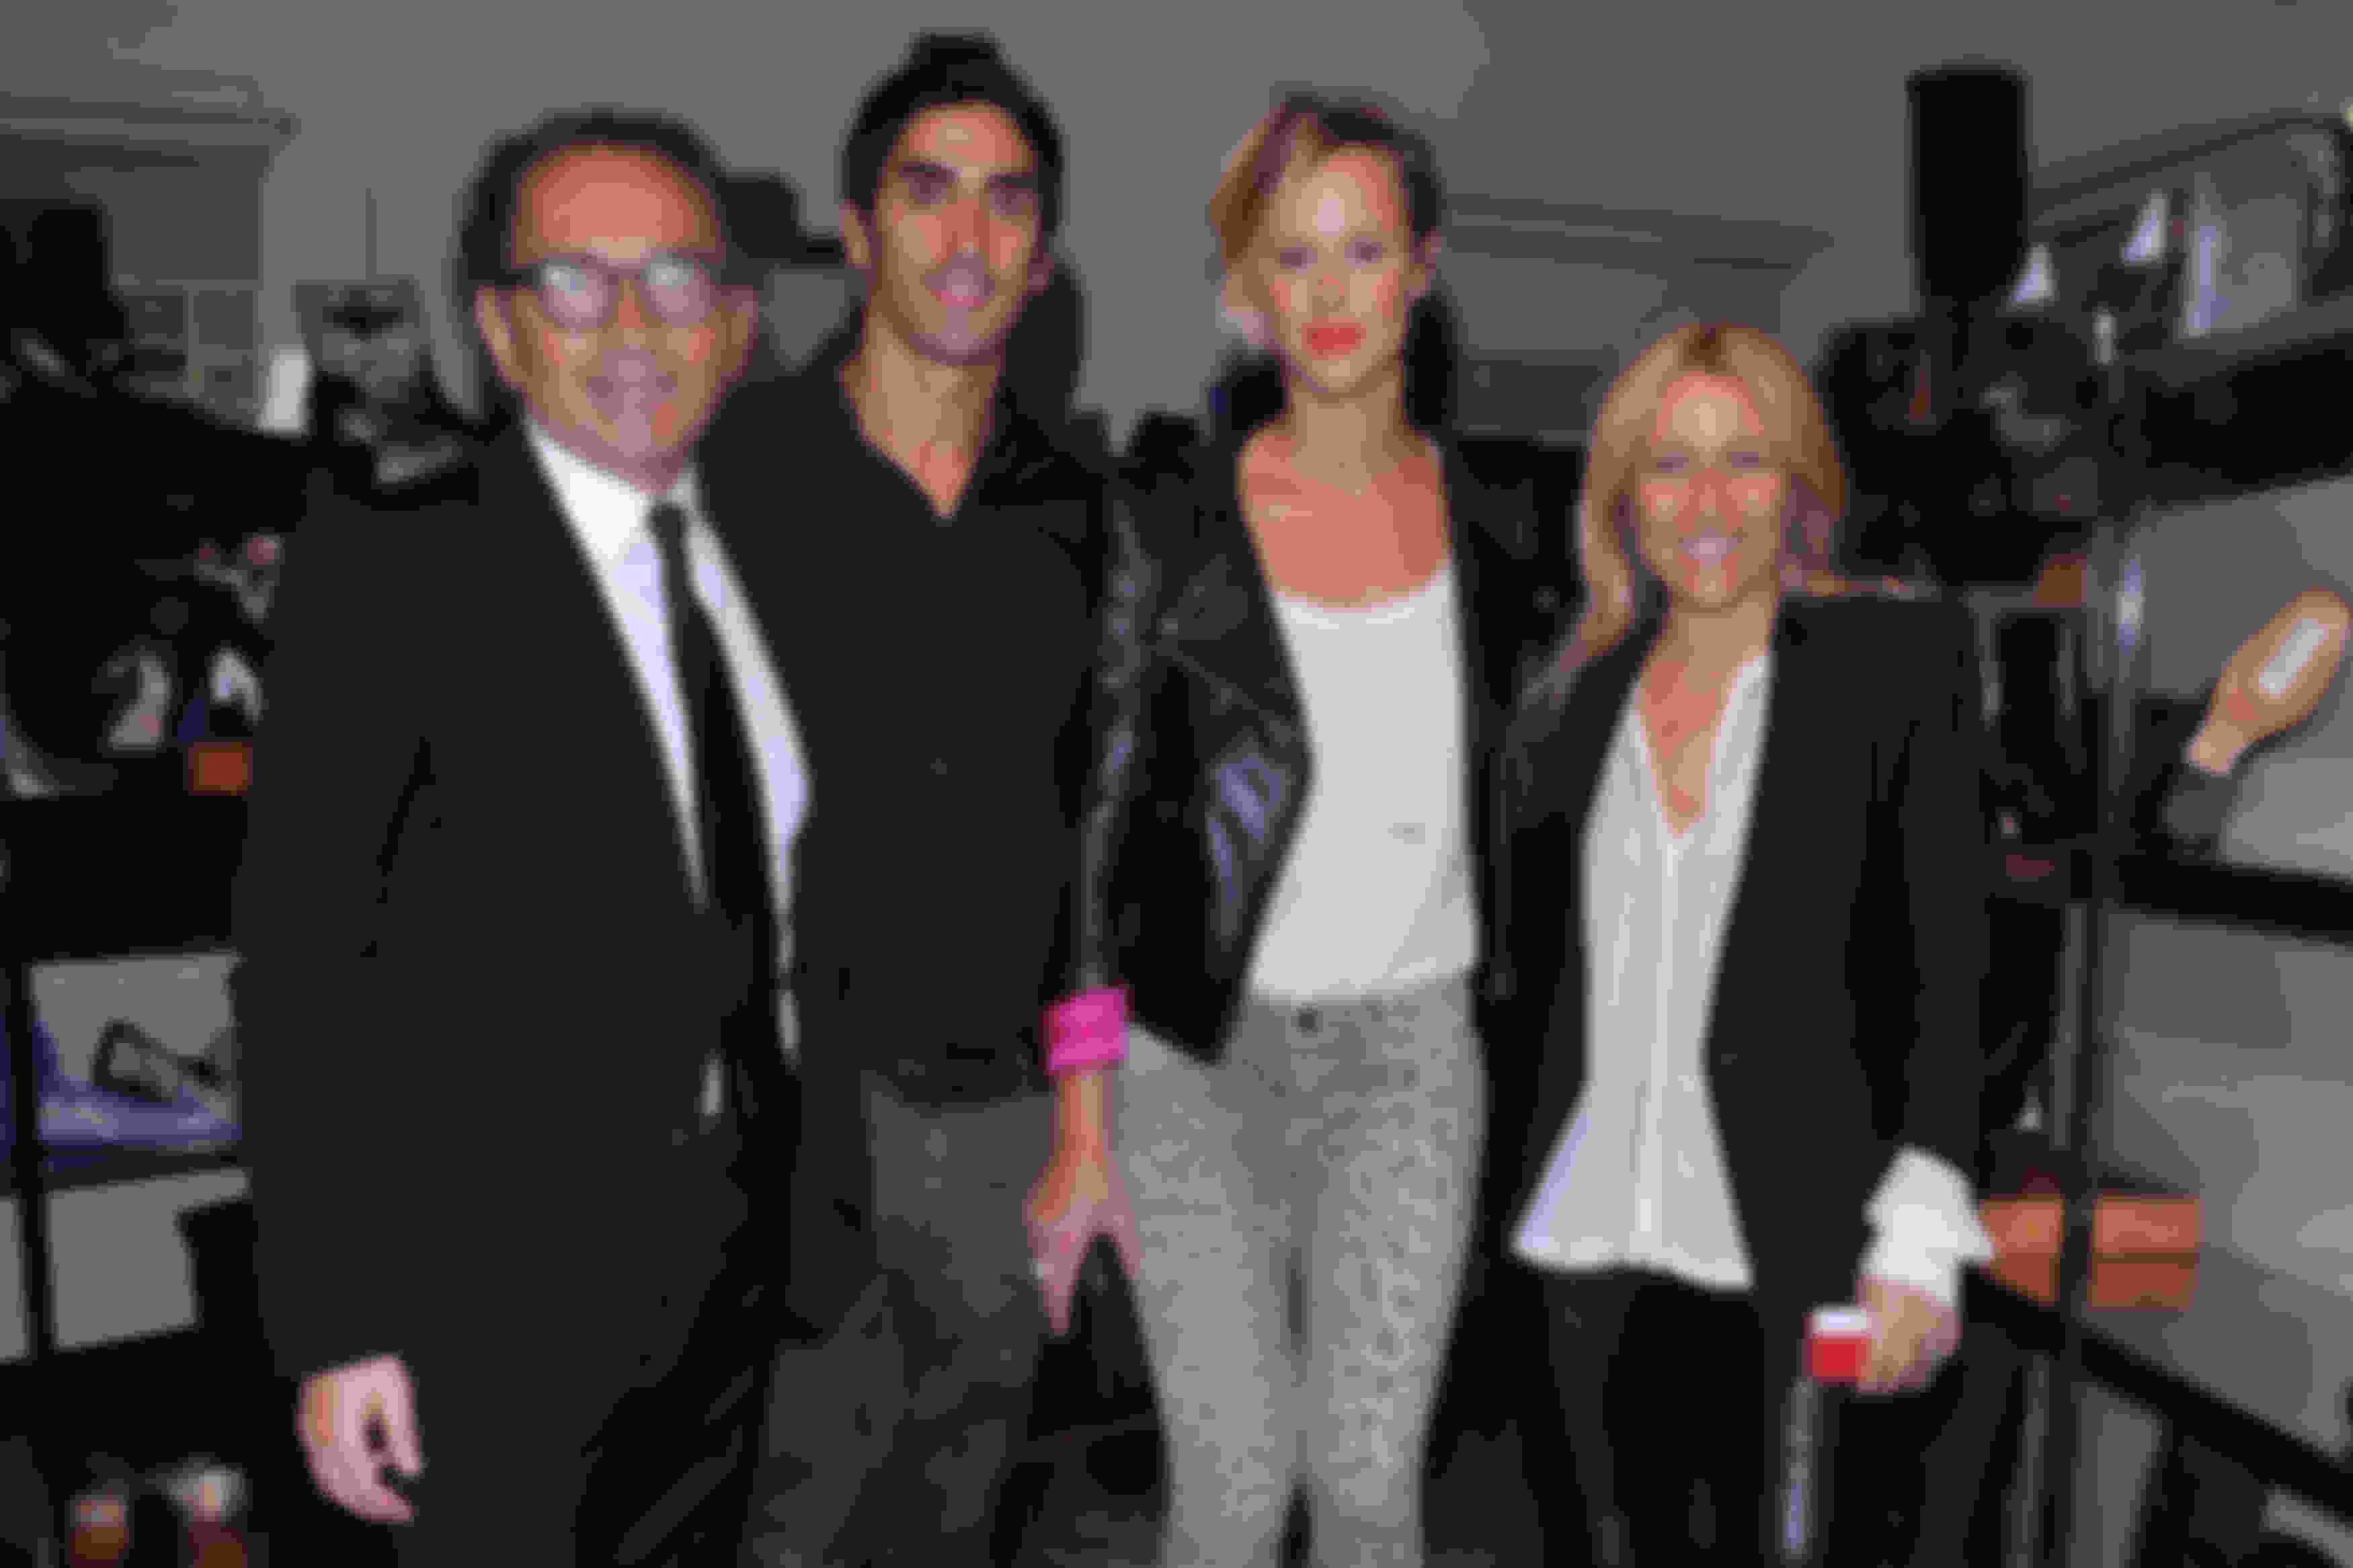 Federica Pellegrini (second from right) at the Milan Fashion Week in 2013.